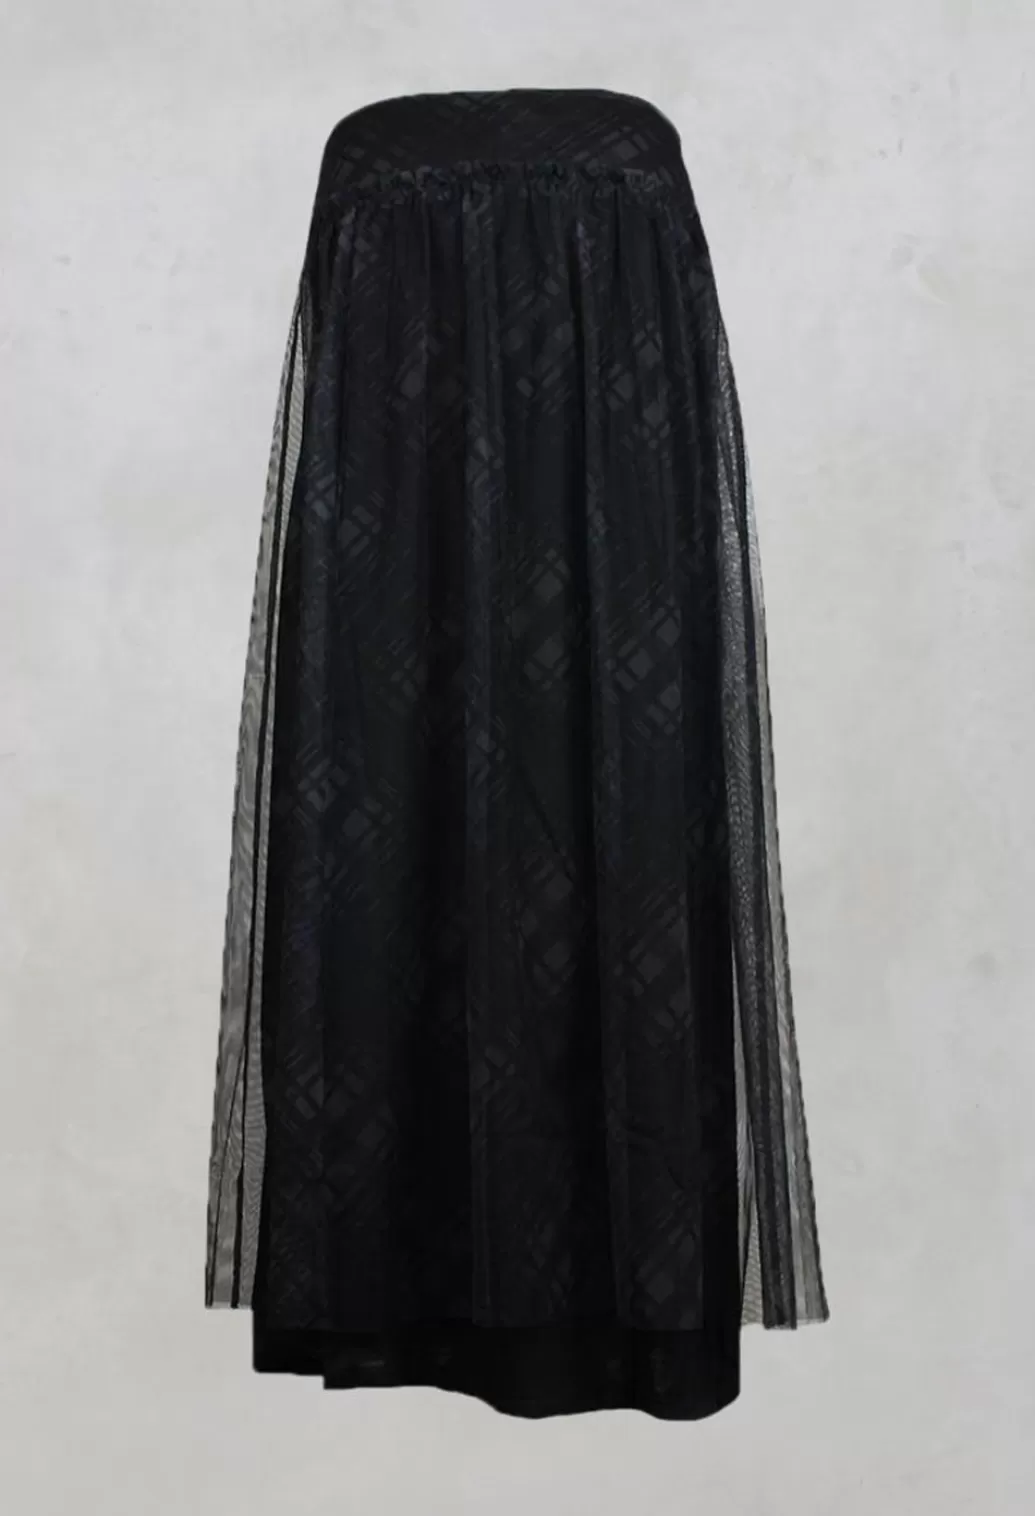 Skirts^Lilith Fine Jersey Skirt With Net Overlay In Inox